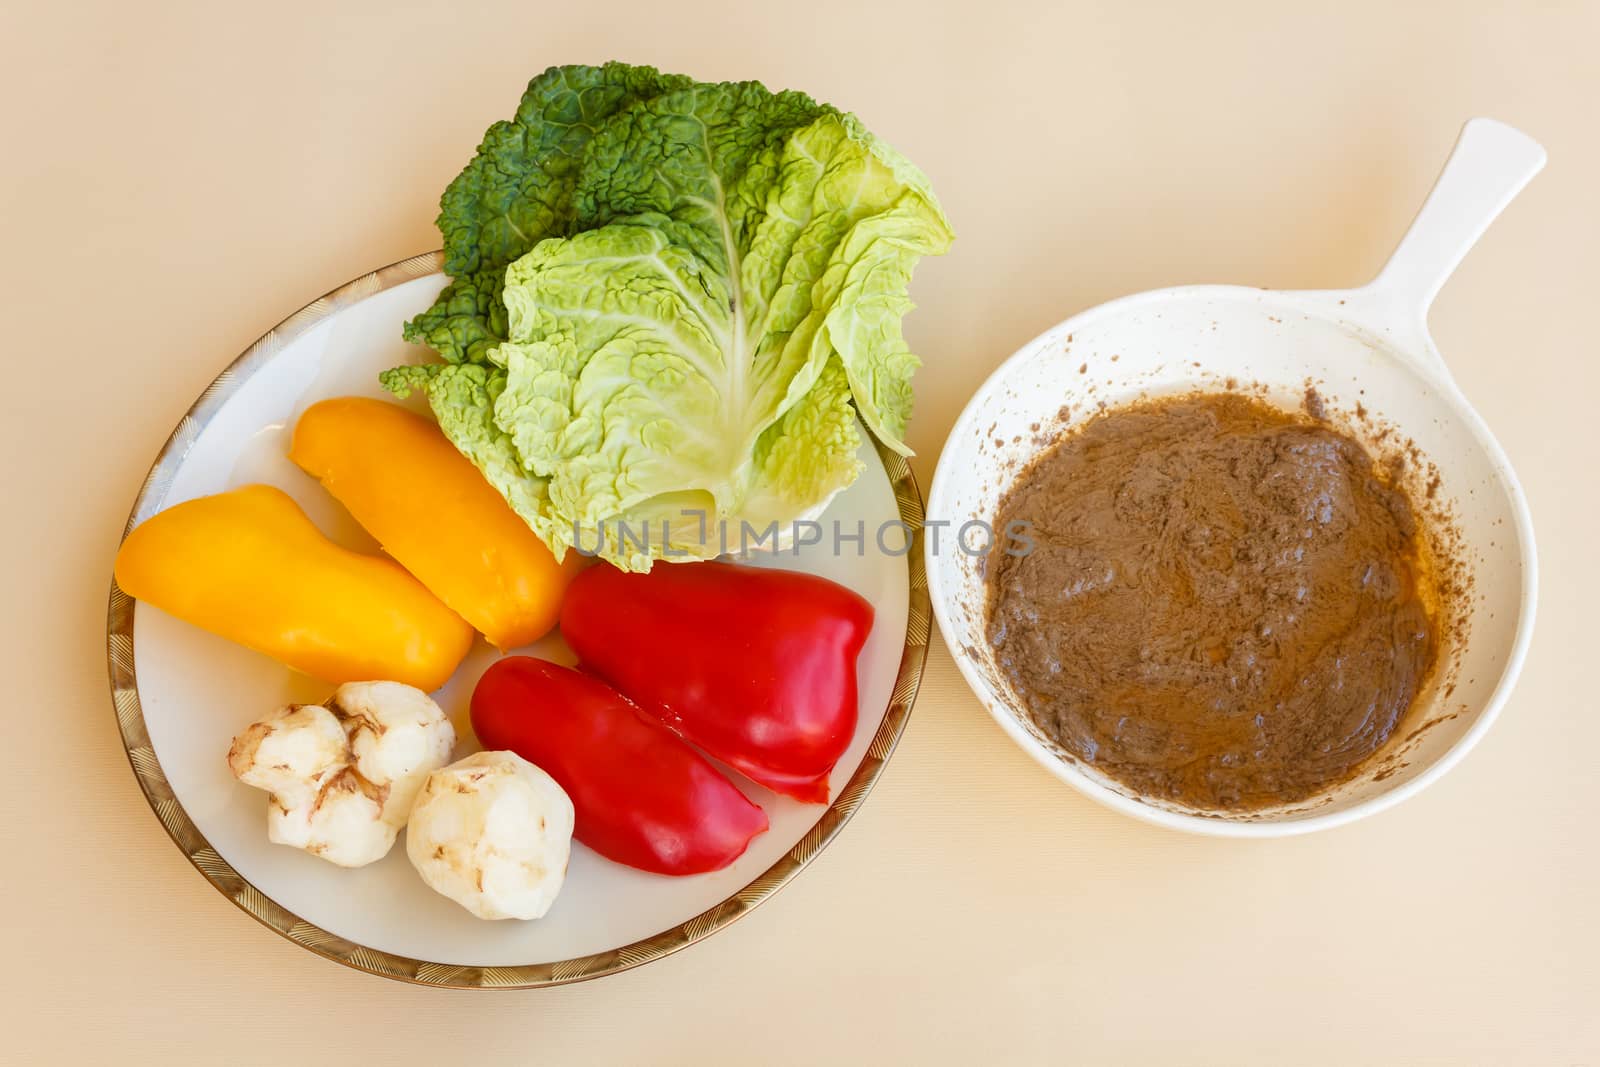 pan of bagna cauda with a plate of red and yellow peppers ,green cabbage and topinambour serving as trimming